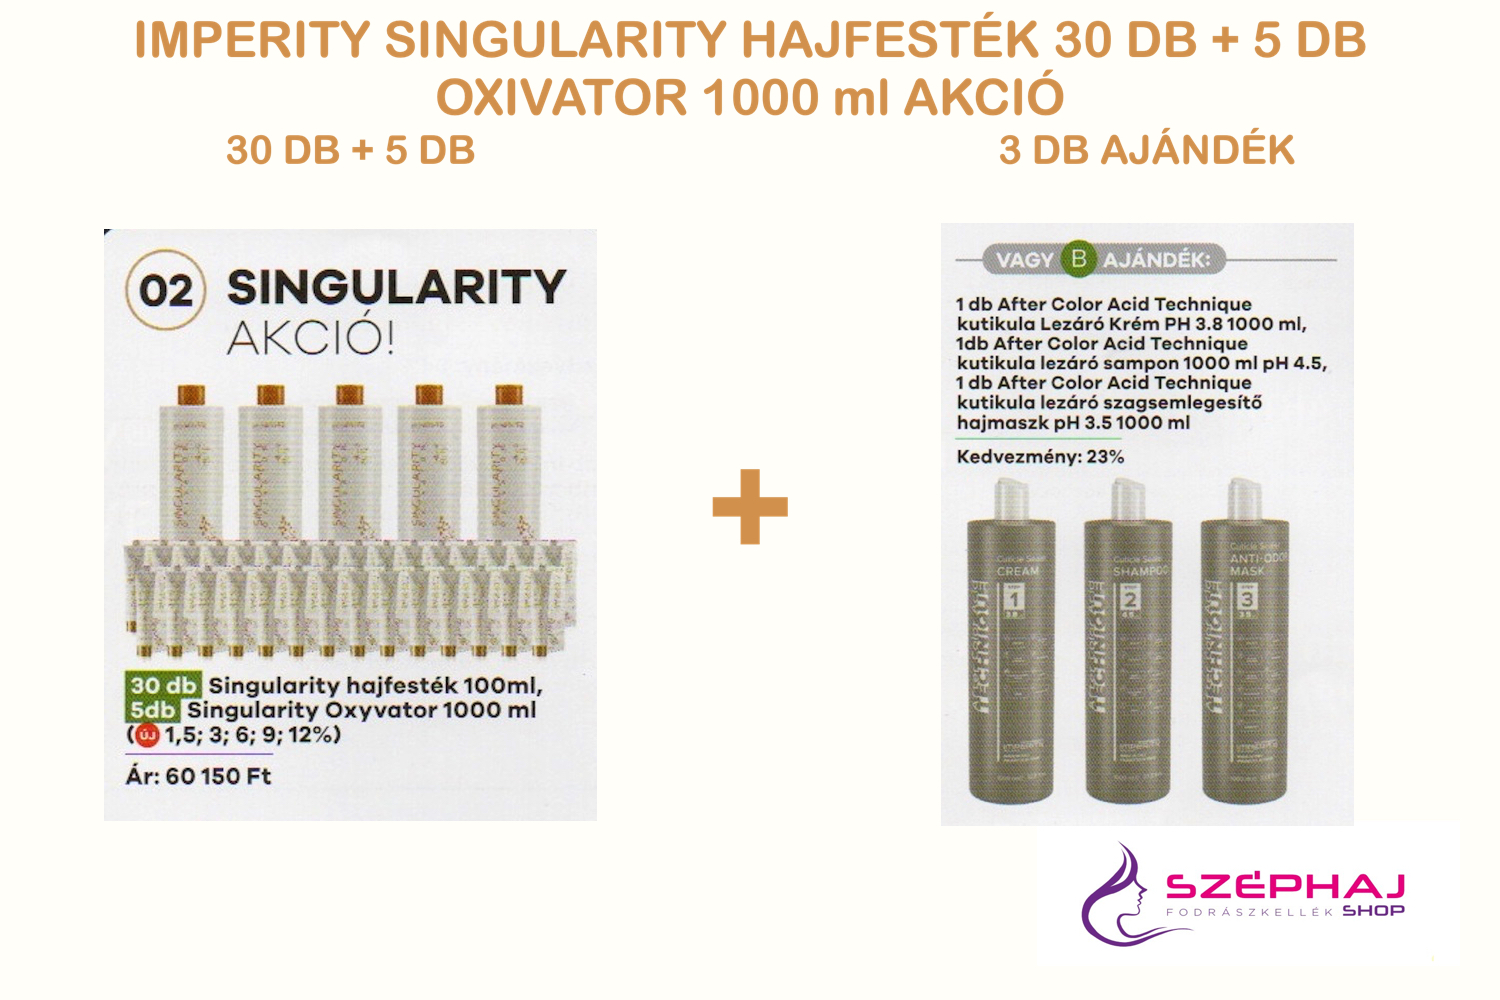 02B IMPERITY Singularity Hair Color 30 + 5 DB Oxivator AKCIÓ